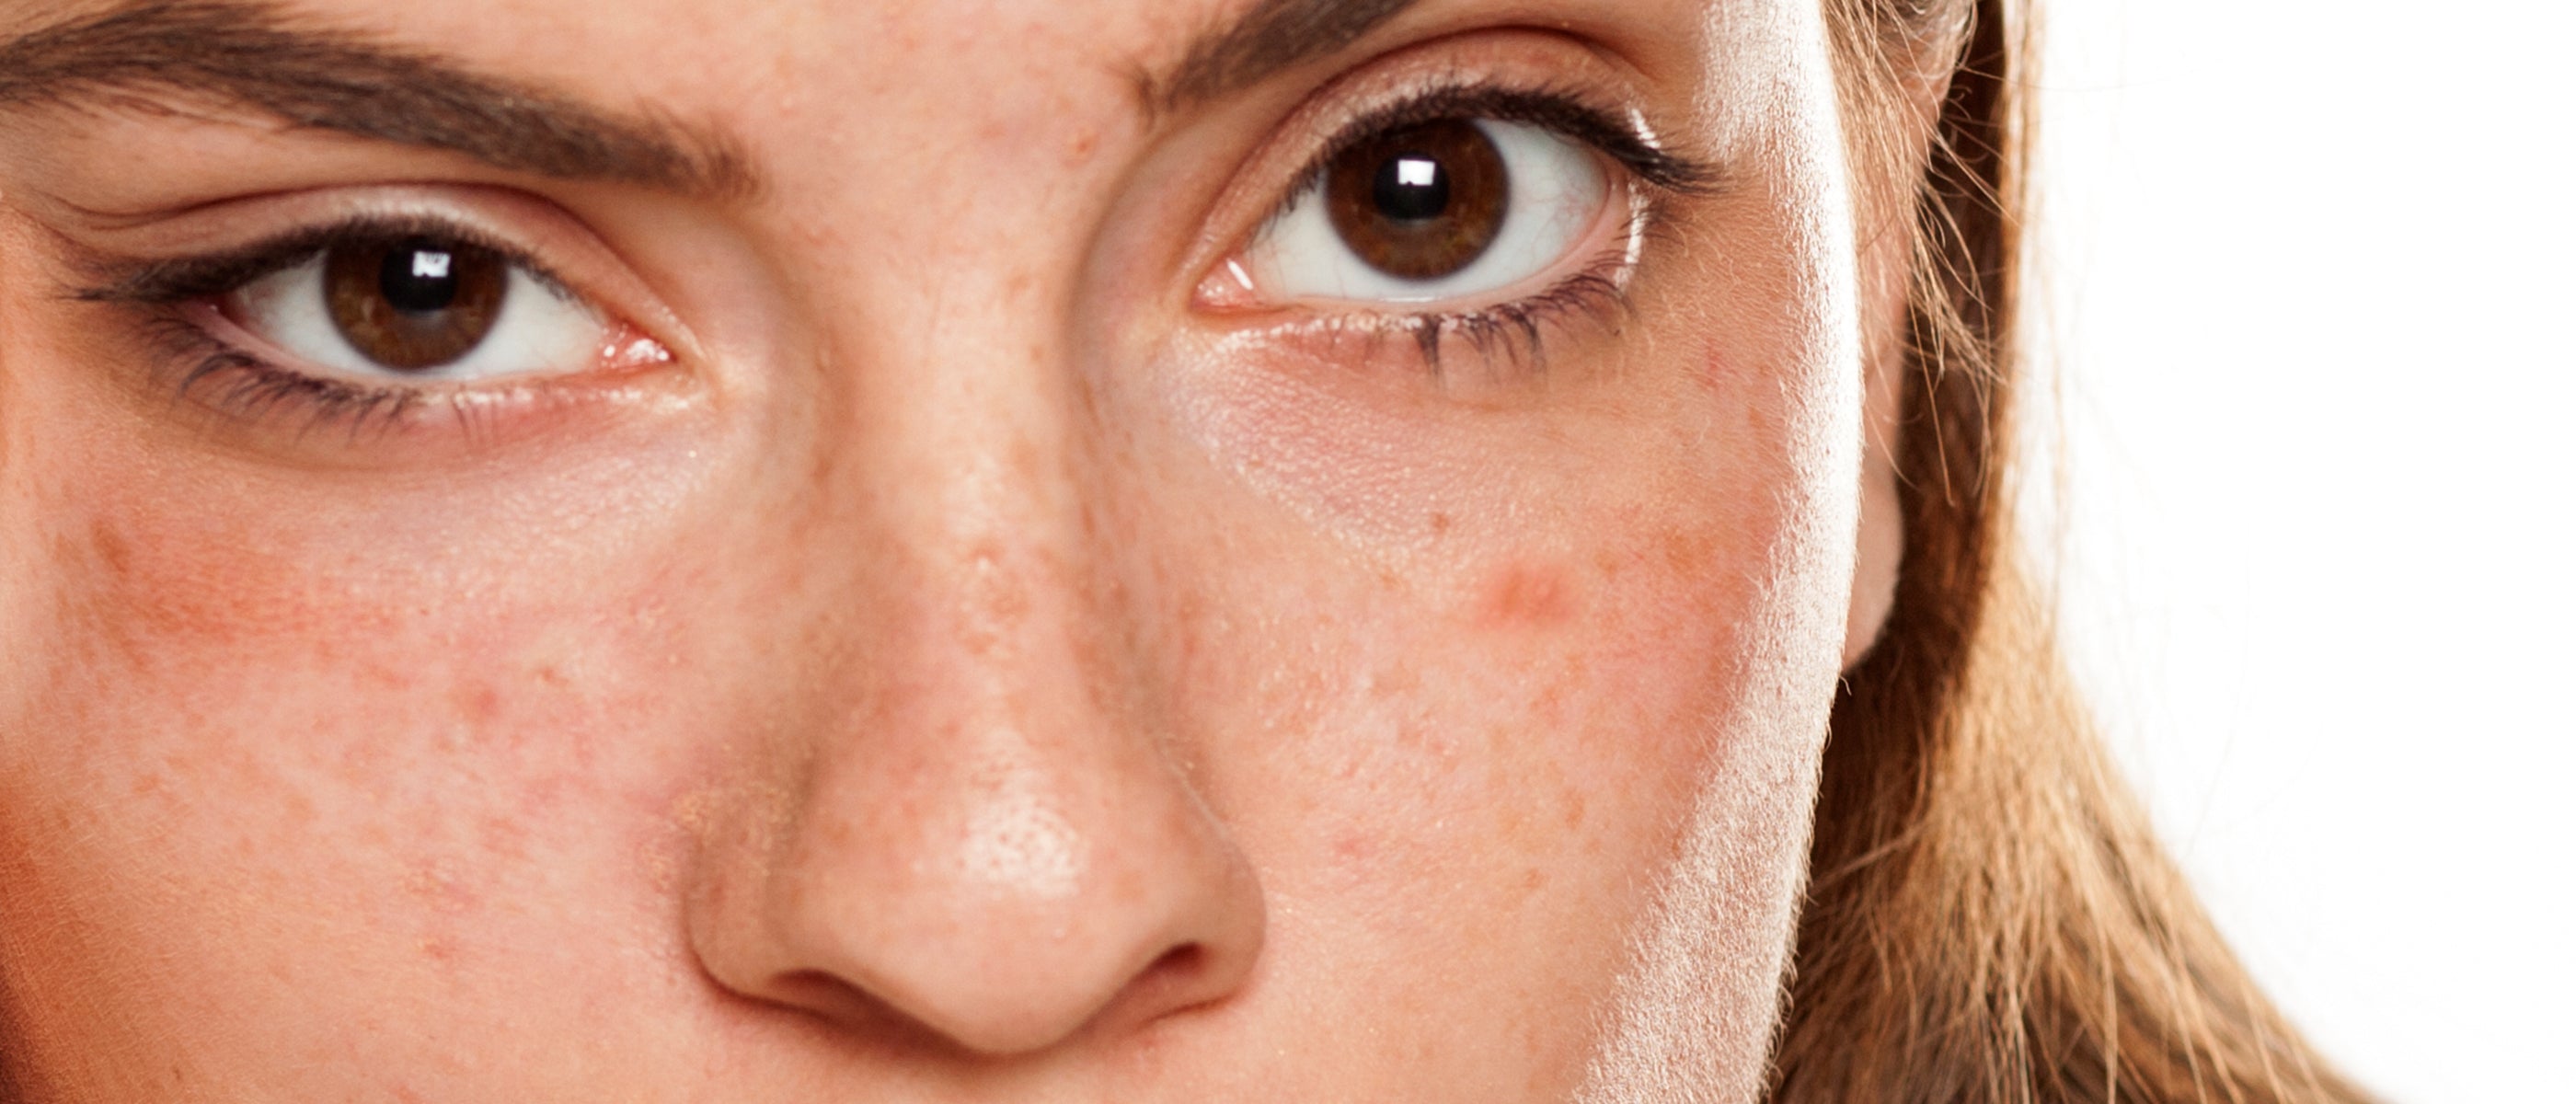 Close-up of woman face showing improvement in acne after using JOVS LED therapy patches.